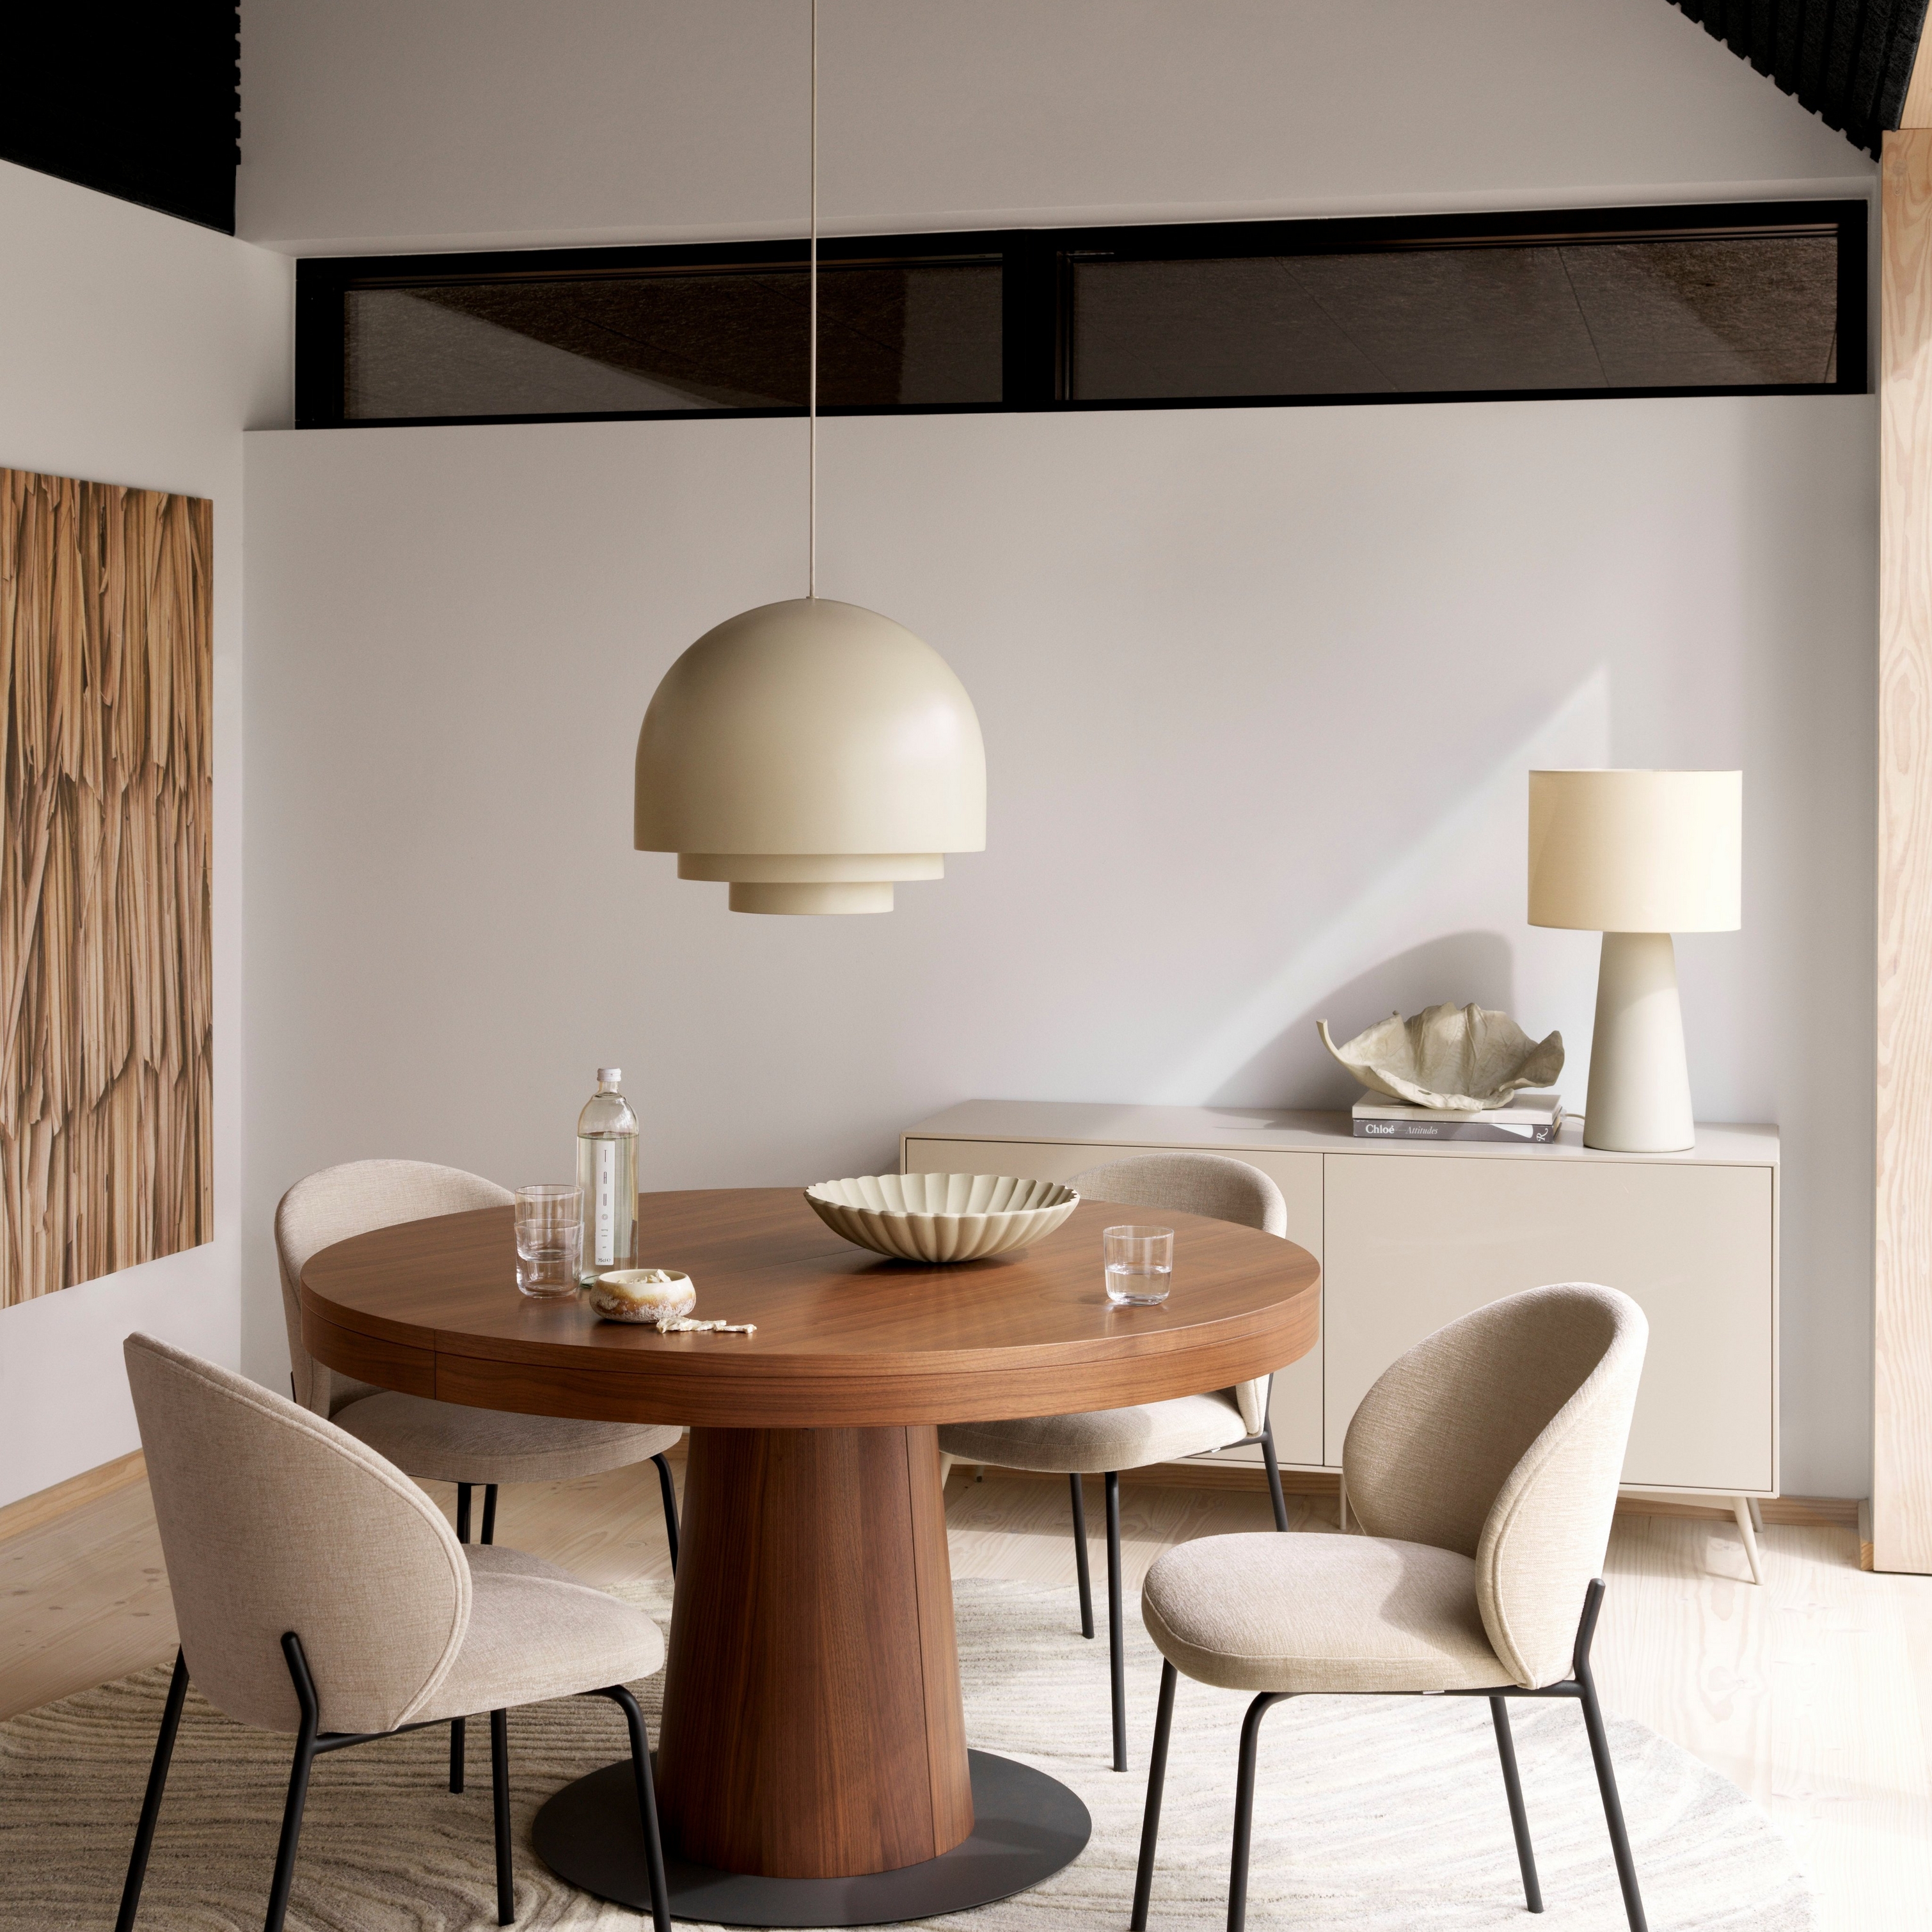 Modern dining room with round wooden Granada table, beige Princeton chairs, pendant light, and cream carpet.